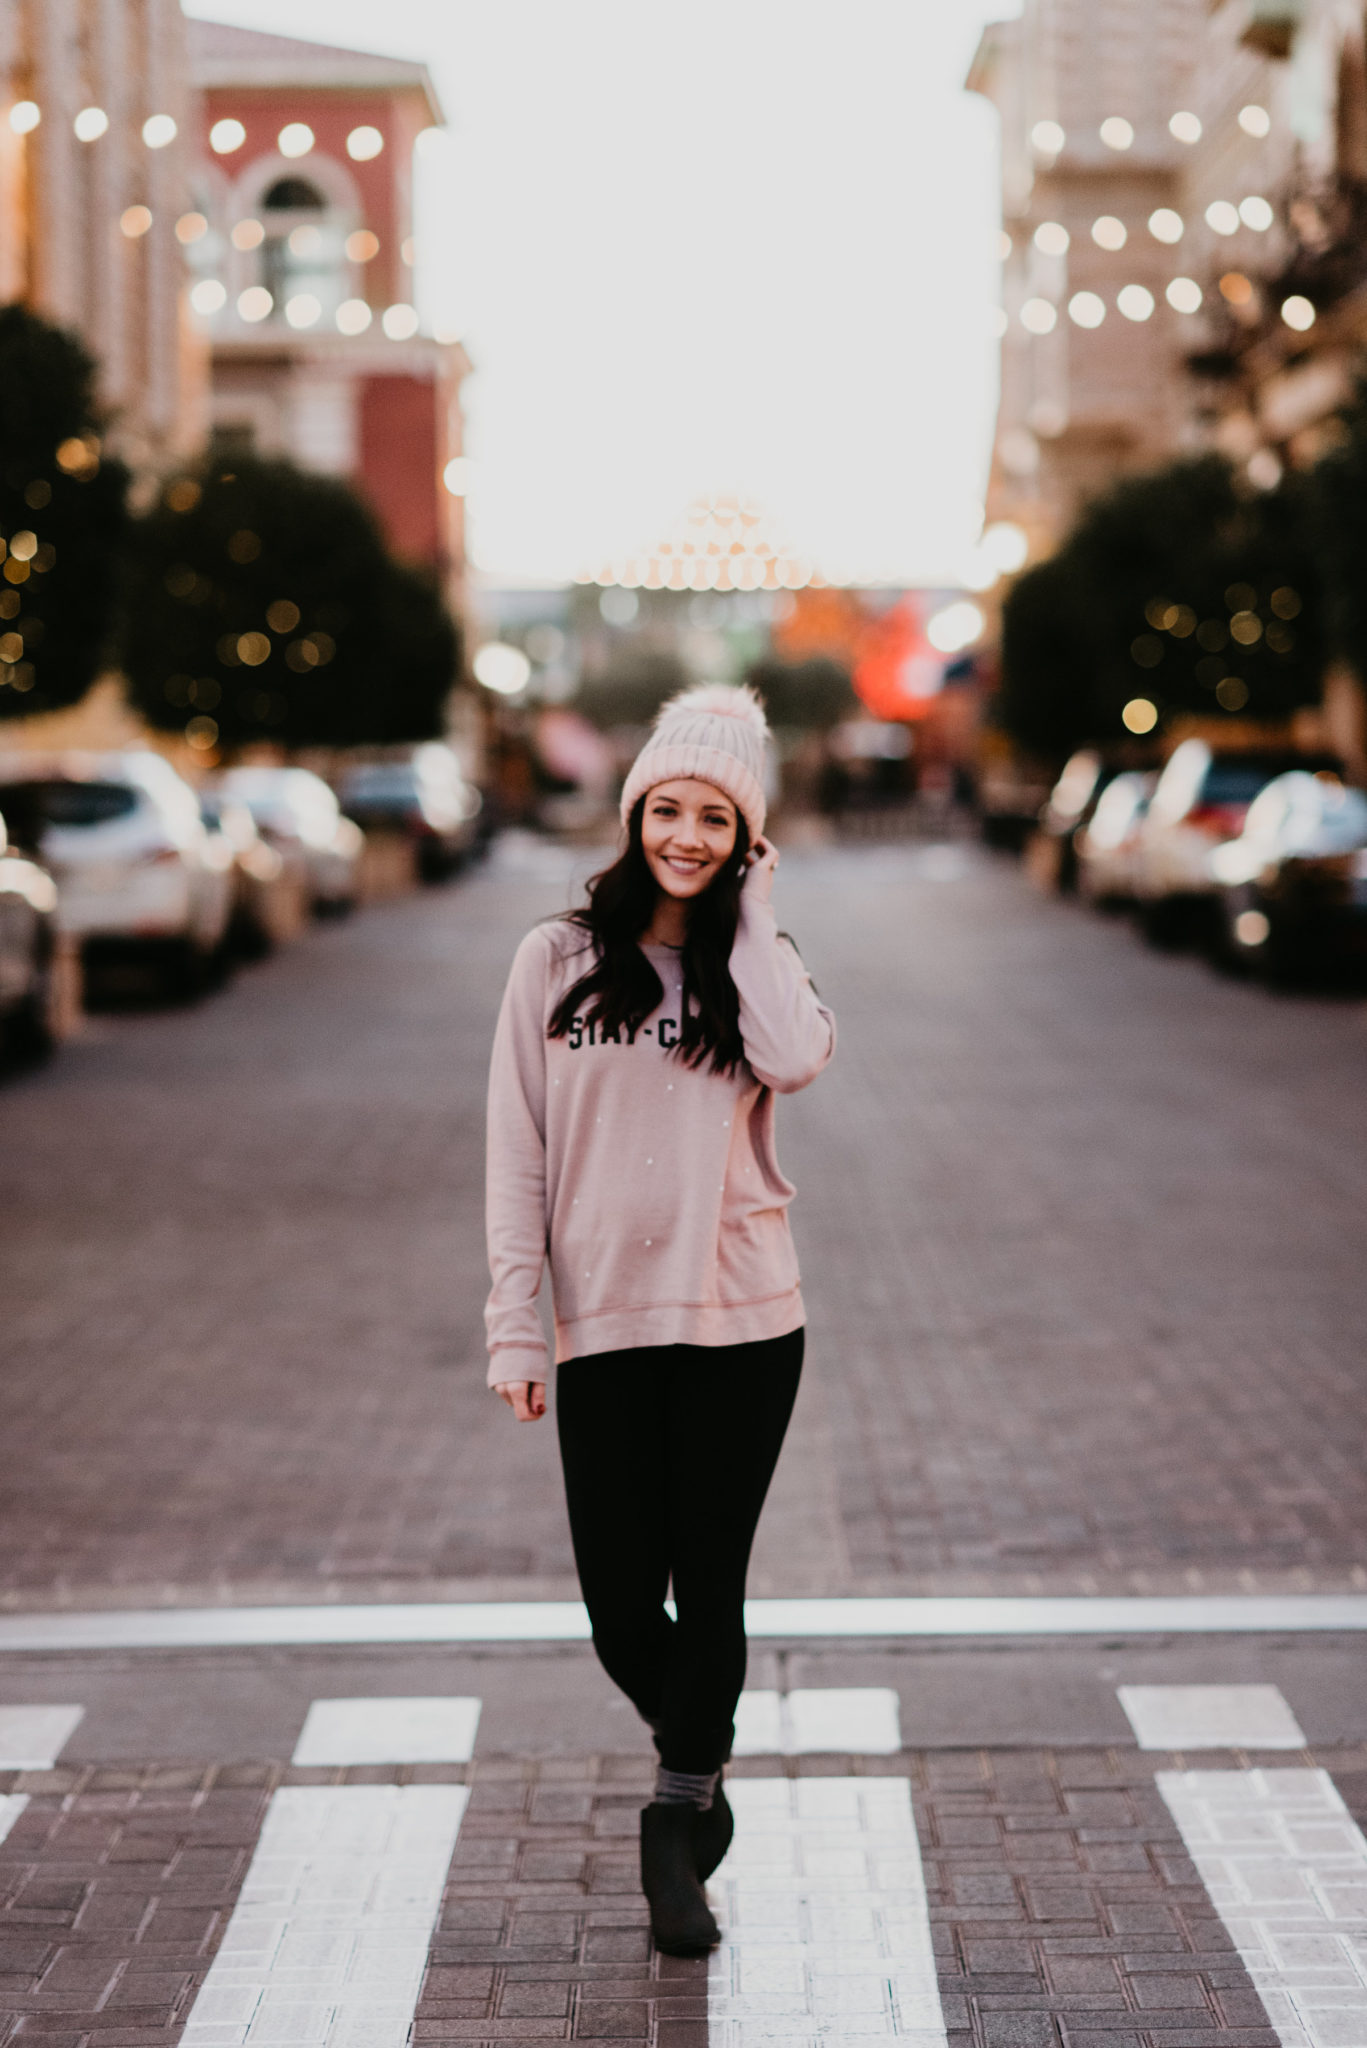 leggings with pink sweatshirt, pink beanie, and rain booties - 15 Ways to Treat Yourself by popular Las Vegas style blogger Outfits & Outings